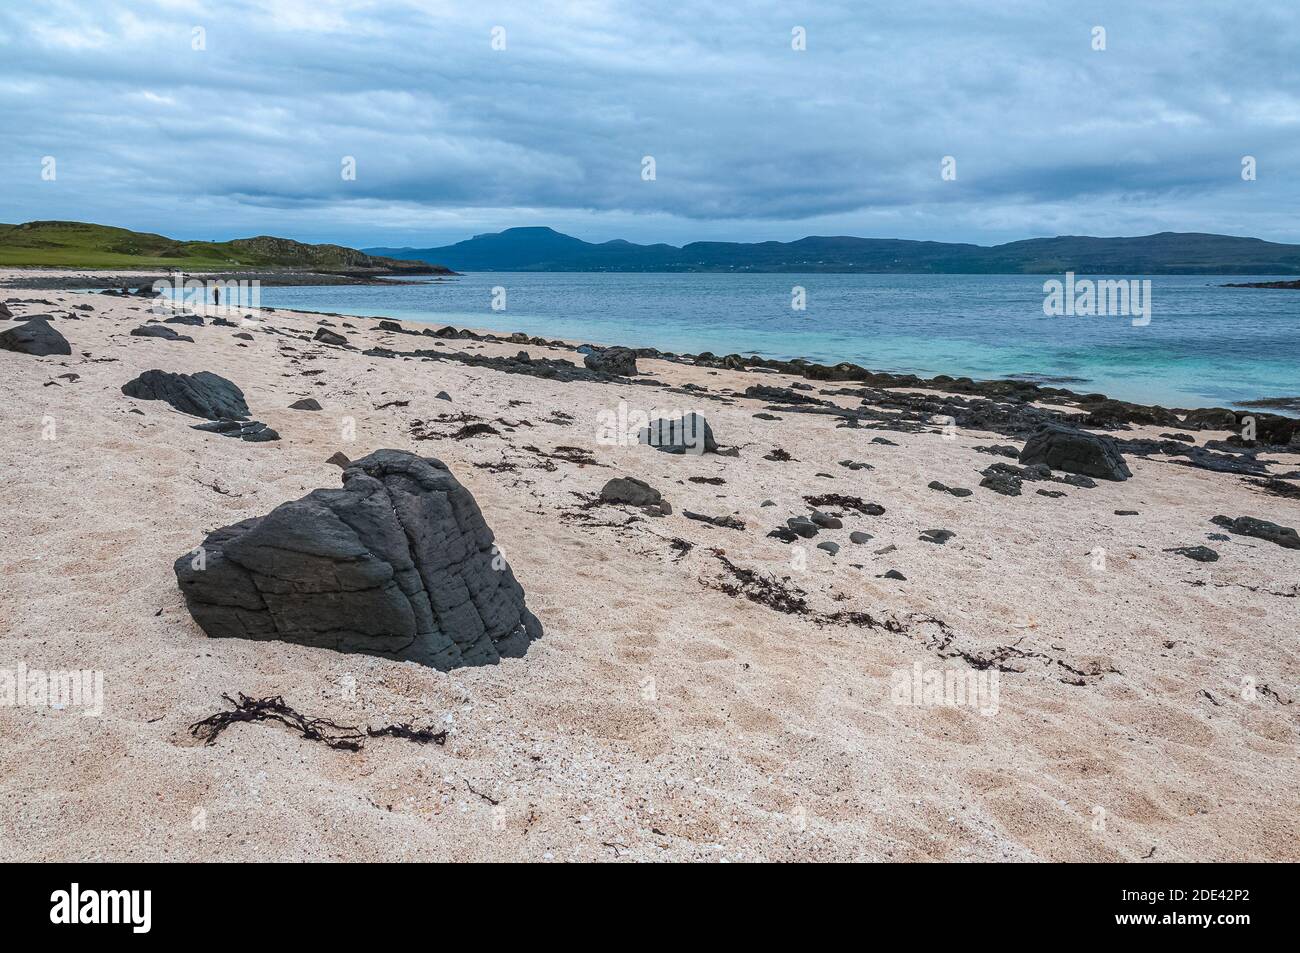 Black stones on white beach, Coral Beach, Isle of Skye, Scotland. Concept: famous natural landscape, Scottish landscape, tranquility and serenity, sea Stock Photo